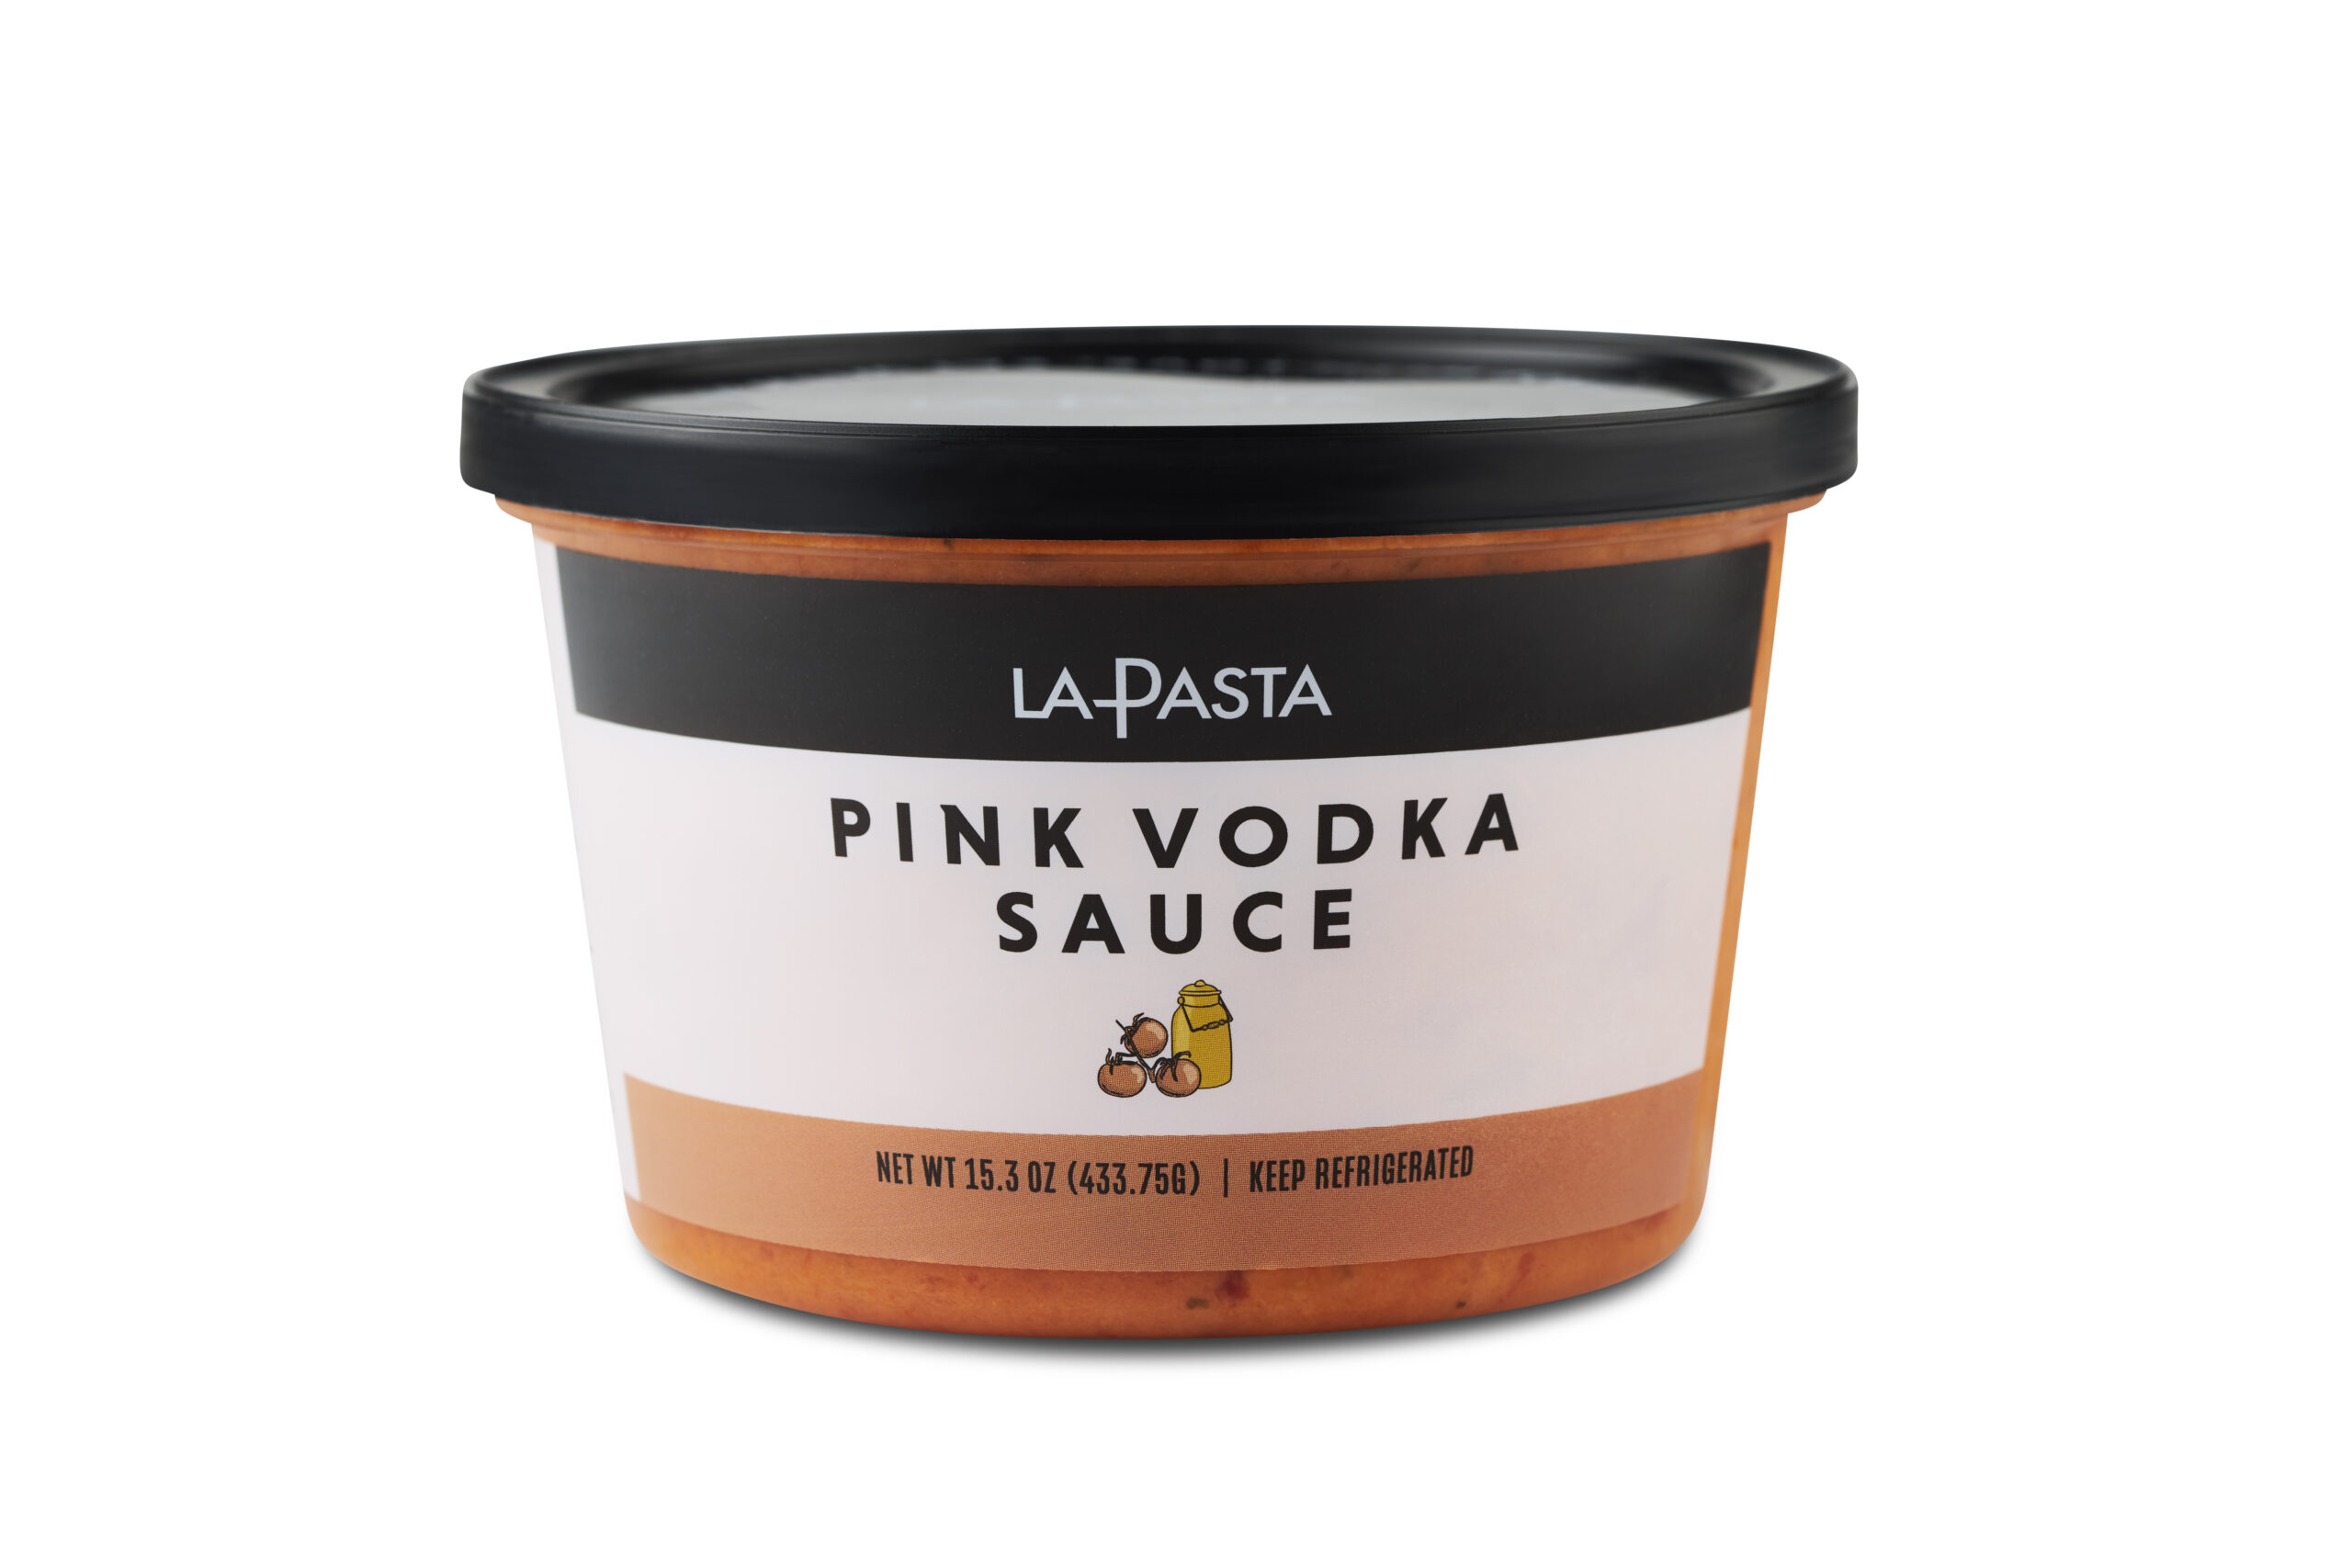 A container of pink vodka sauce.